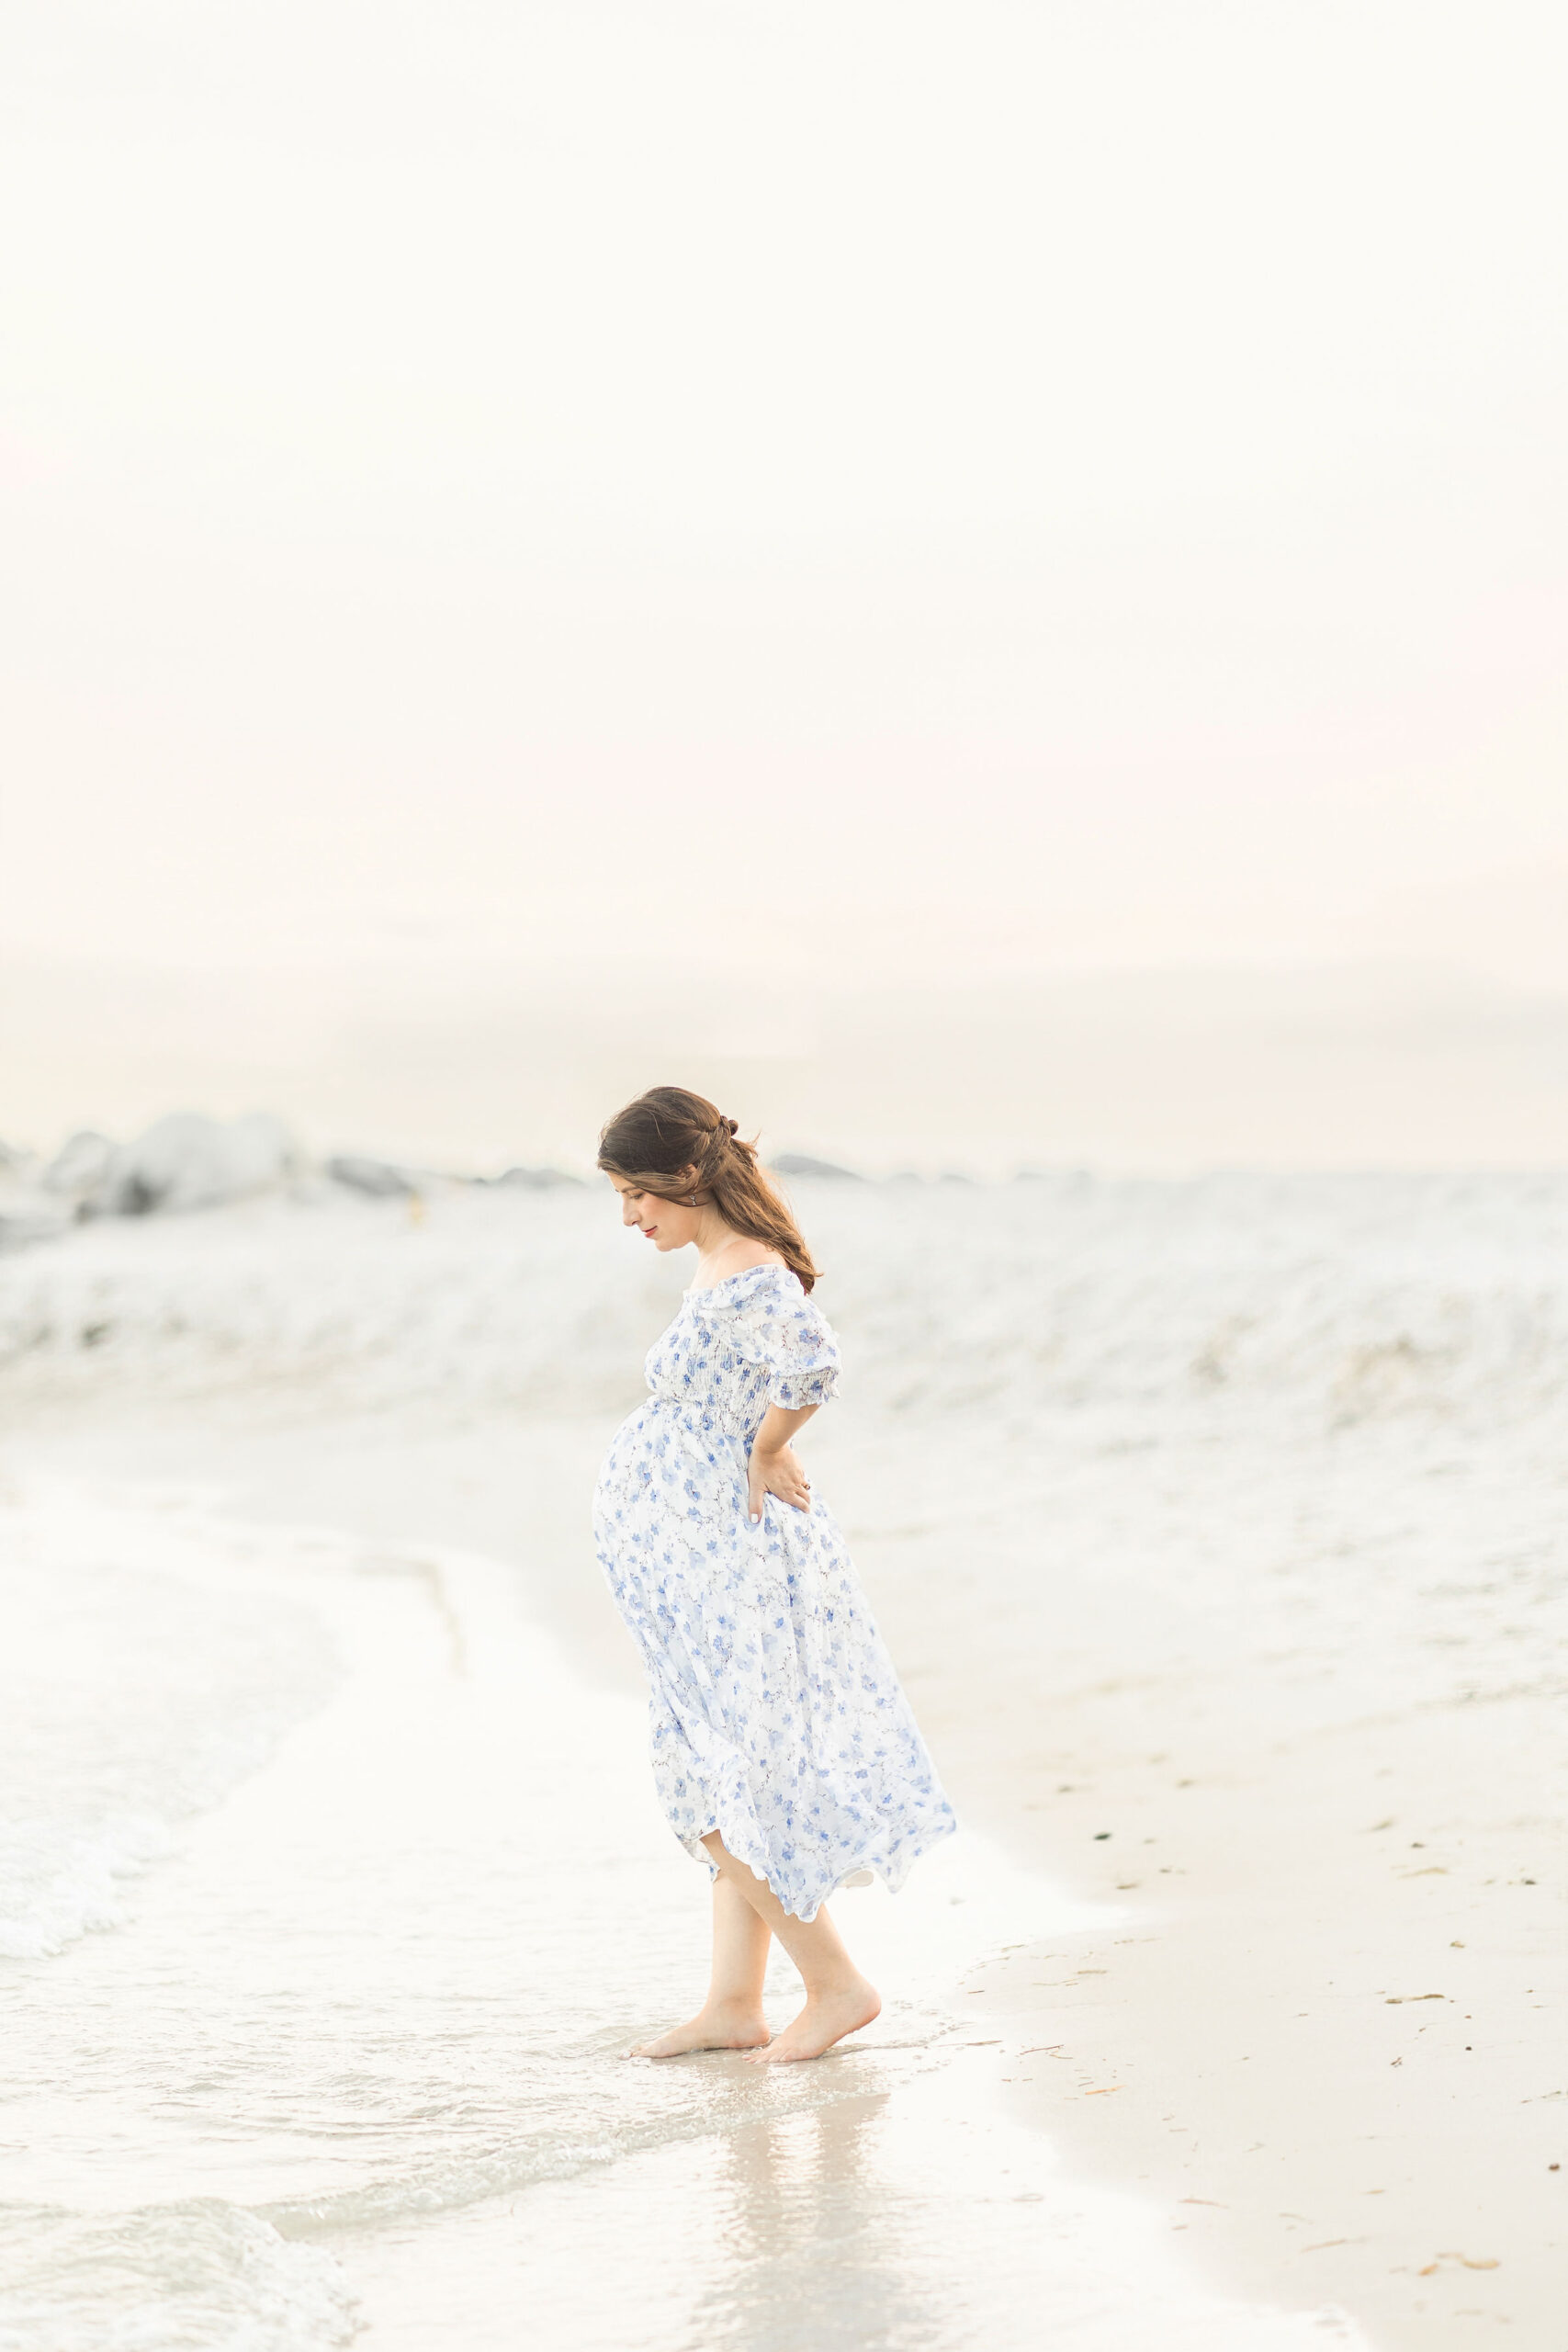 A mom to be walks in the water on a beach in a blue and white maternity dress